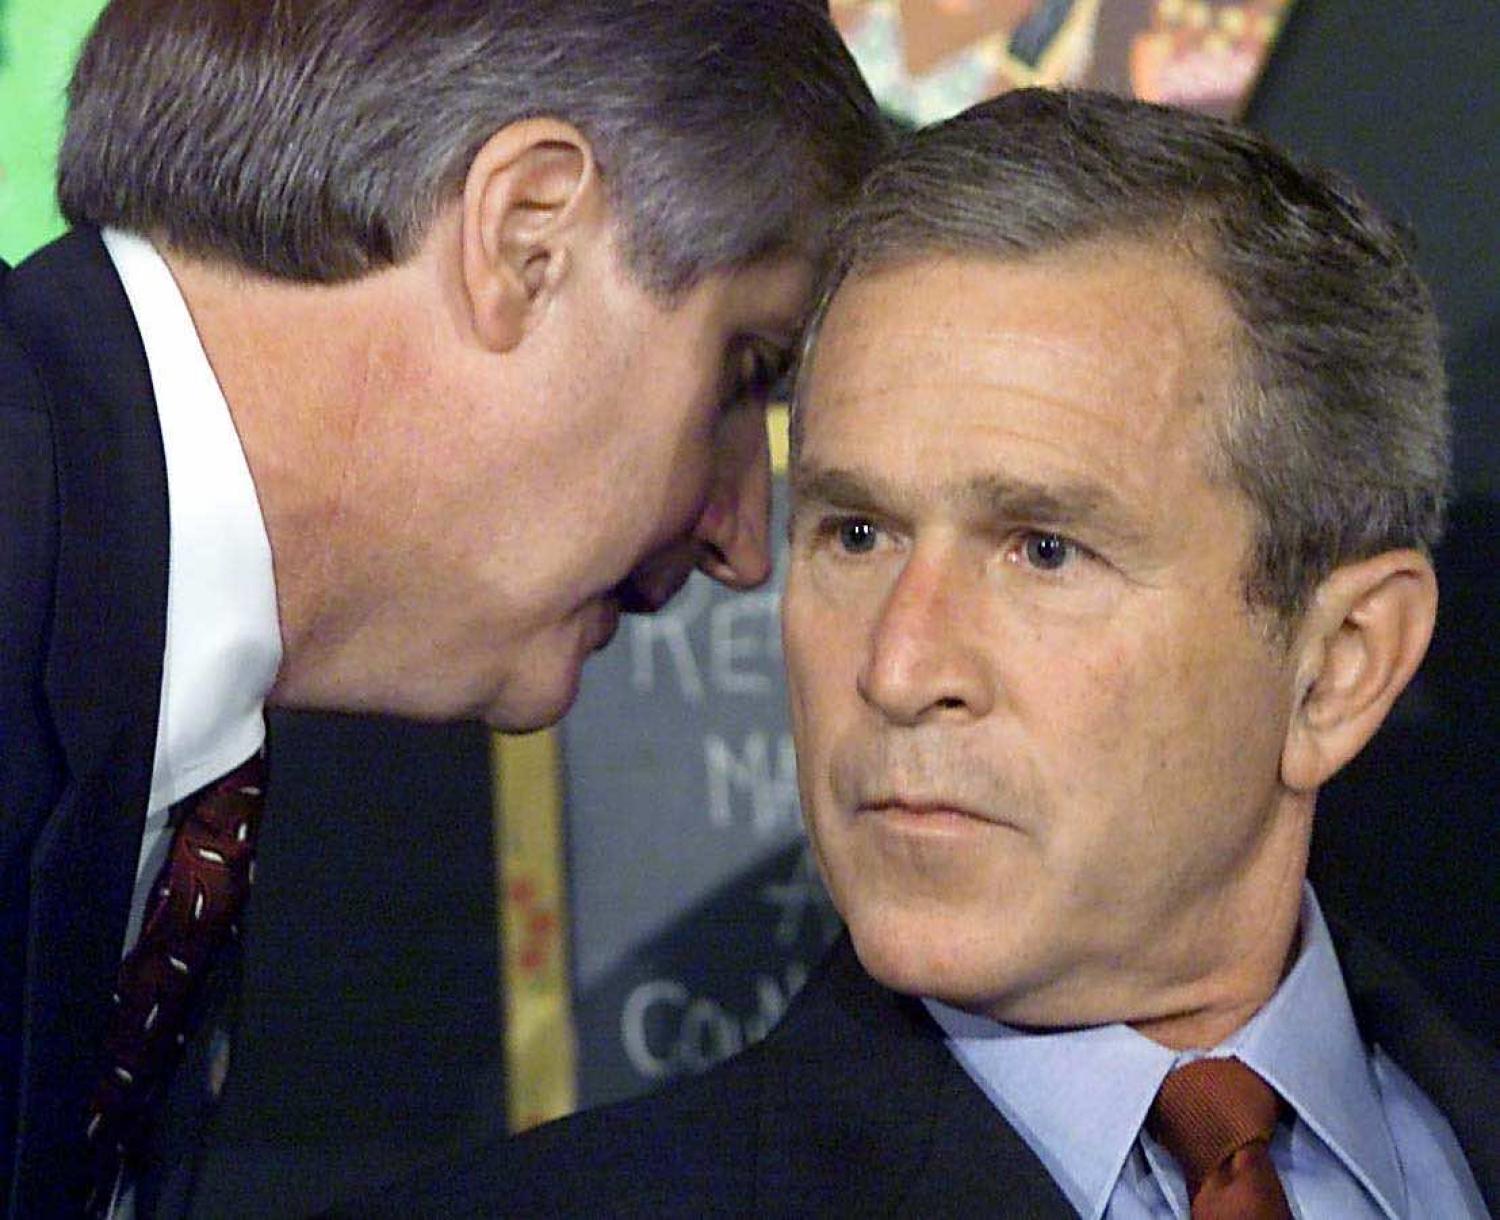 The moment US President George W. Bush has his early morning school reading event interrupted with news of New York, 11 September 2001 (Paul J. Richards/AFP via Getty Images)